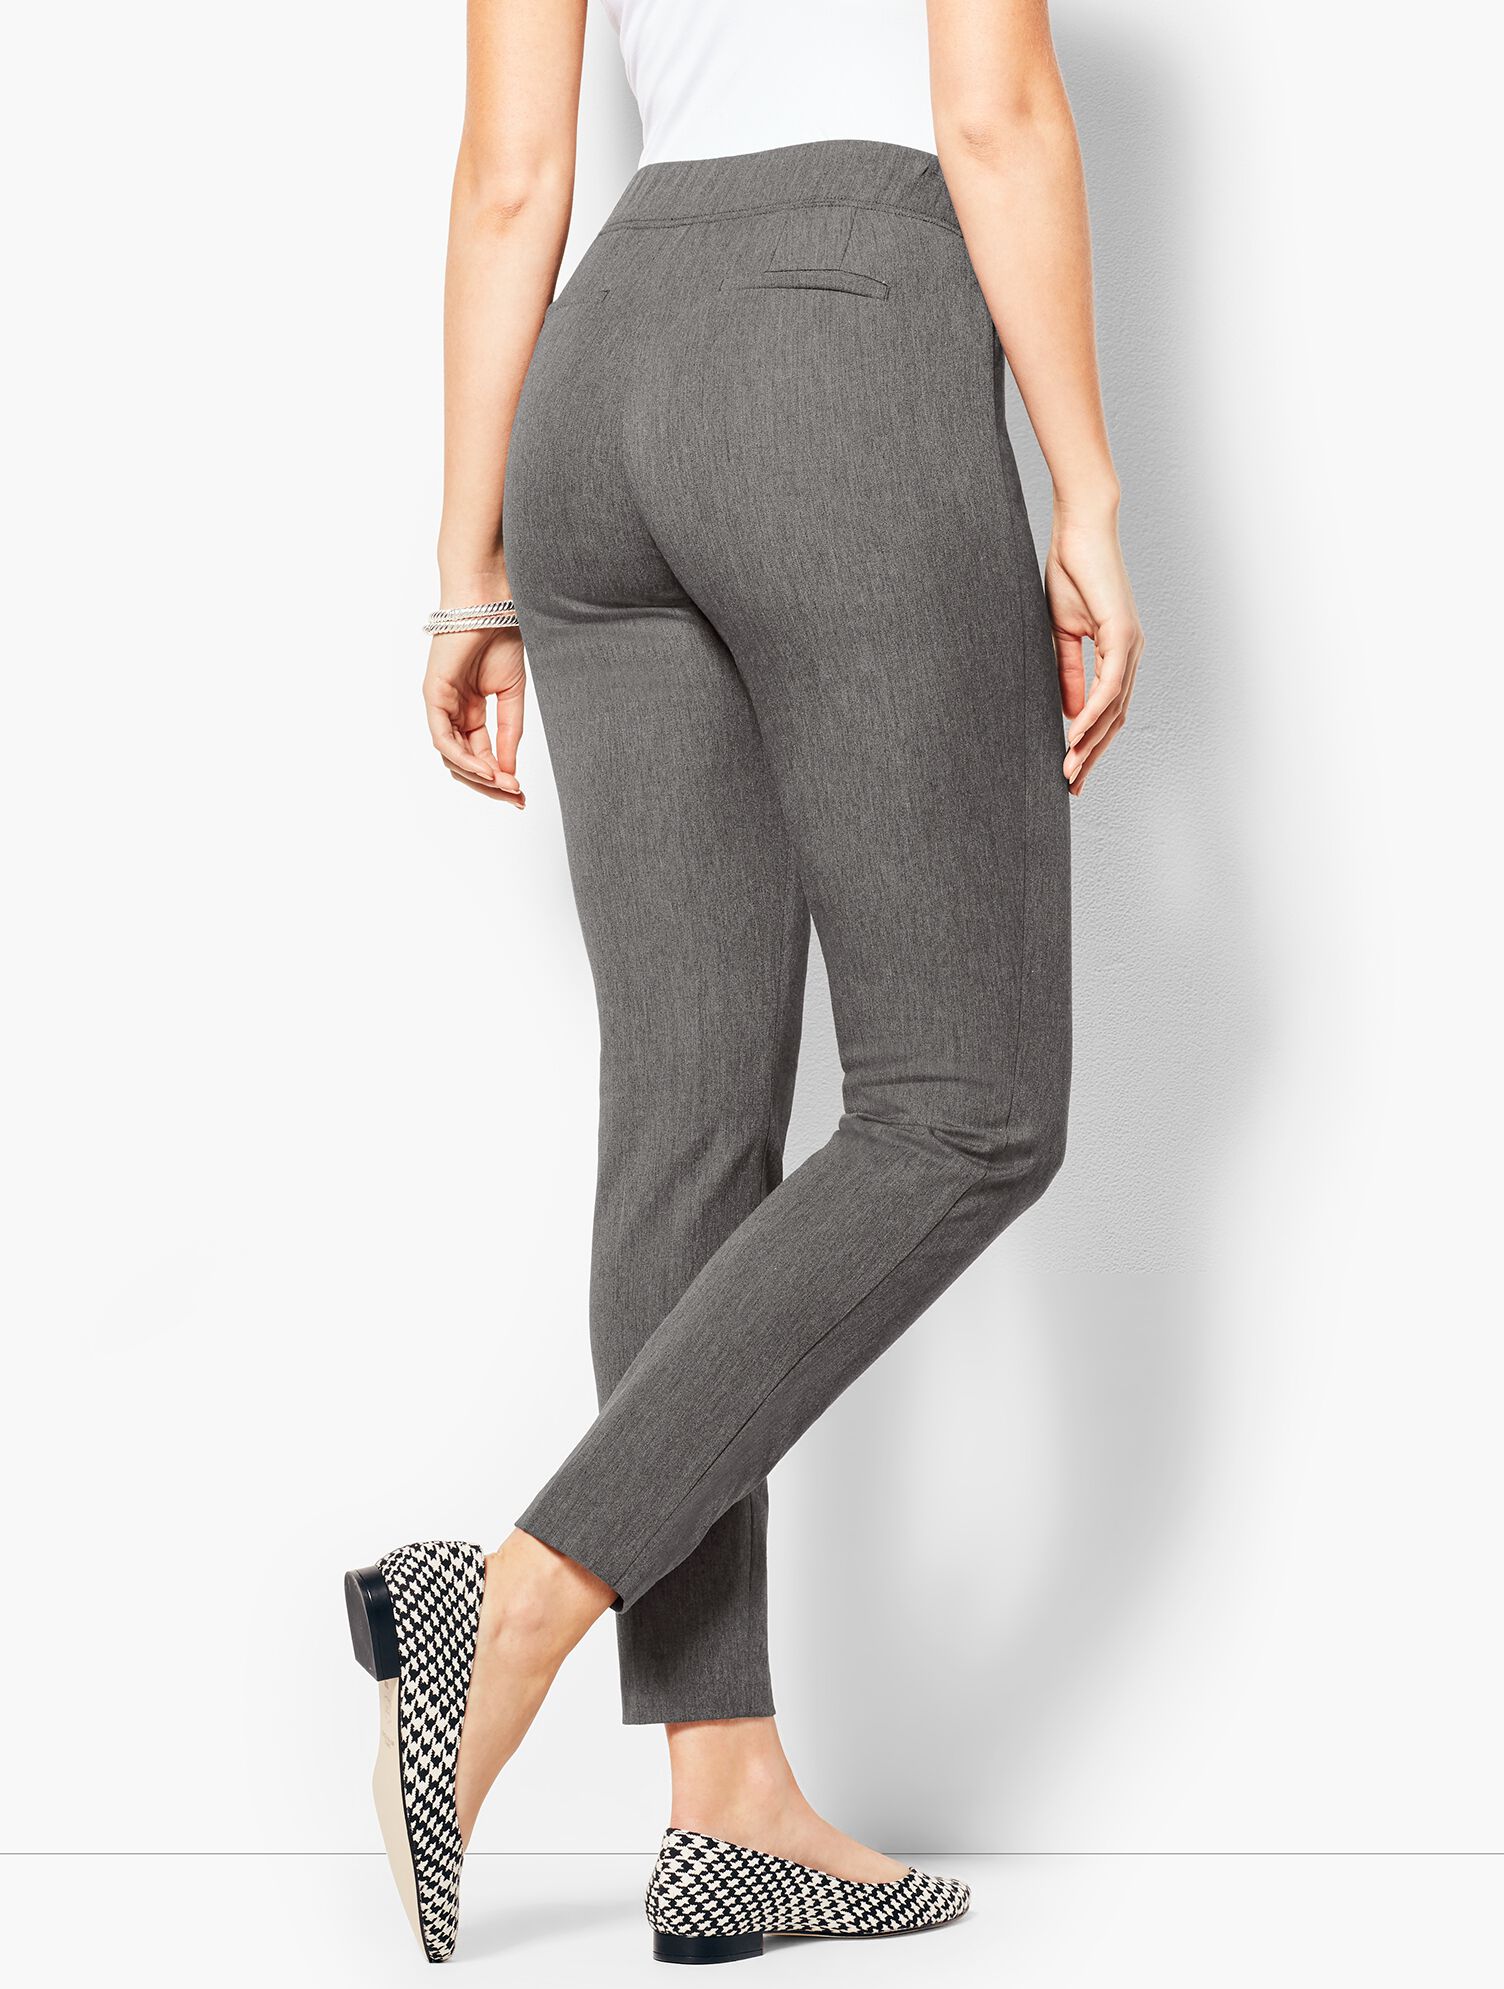 Charcoal Cotton Bi-Stretch Pull-On Skinny Ankle Pant - Curvy Fit | Talbots